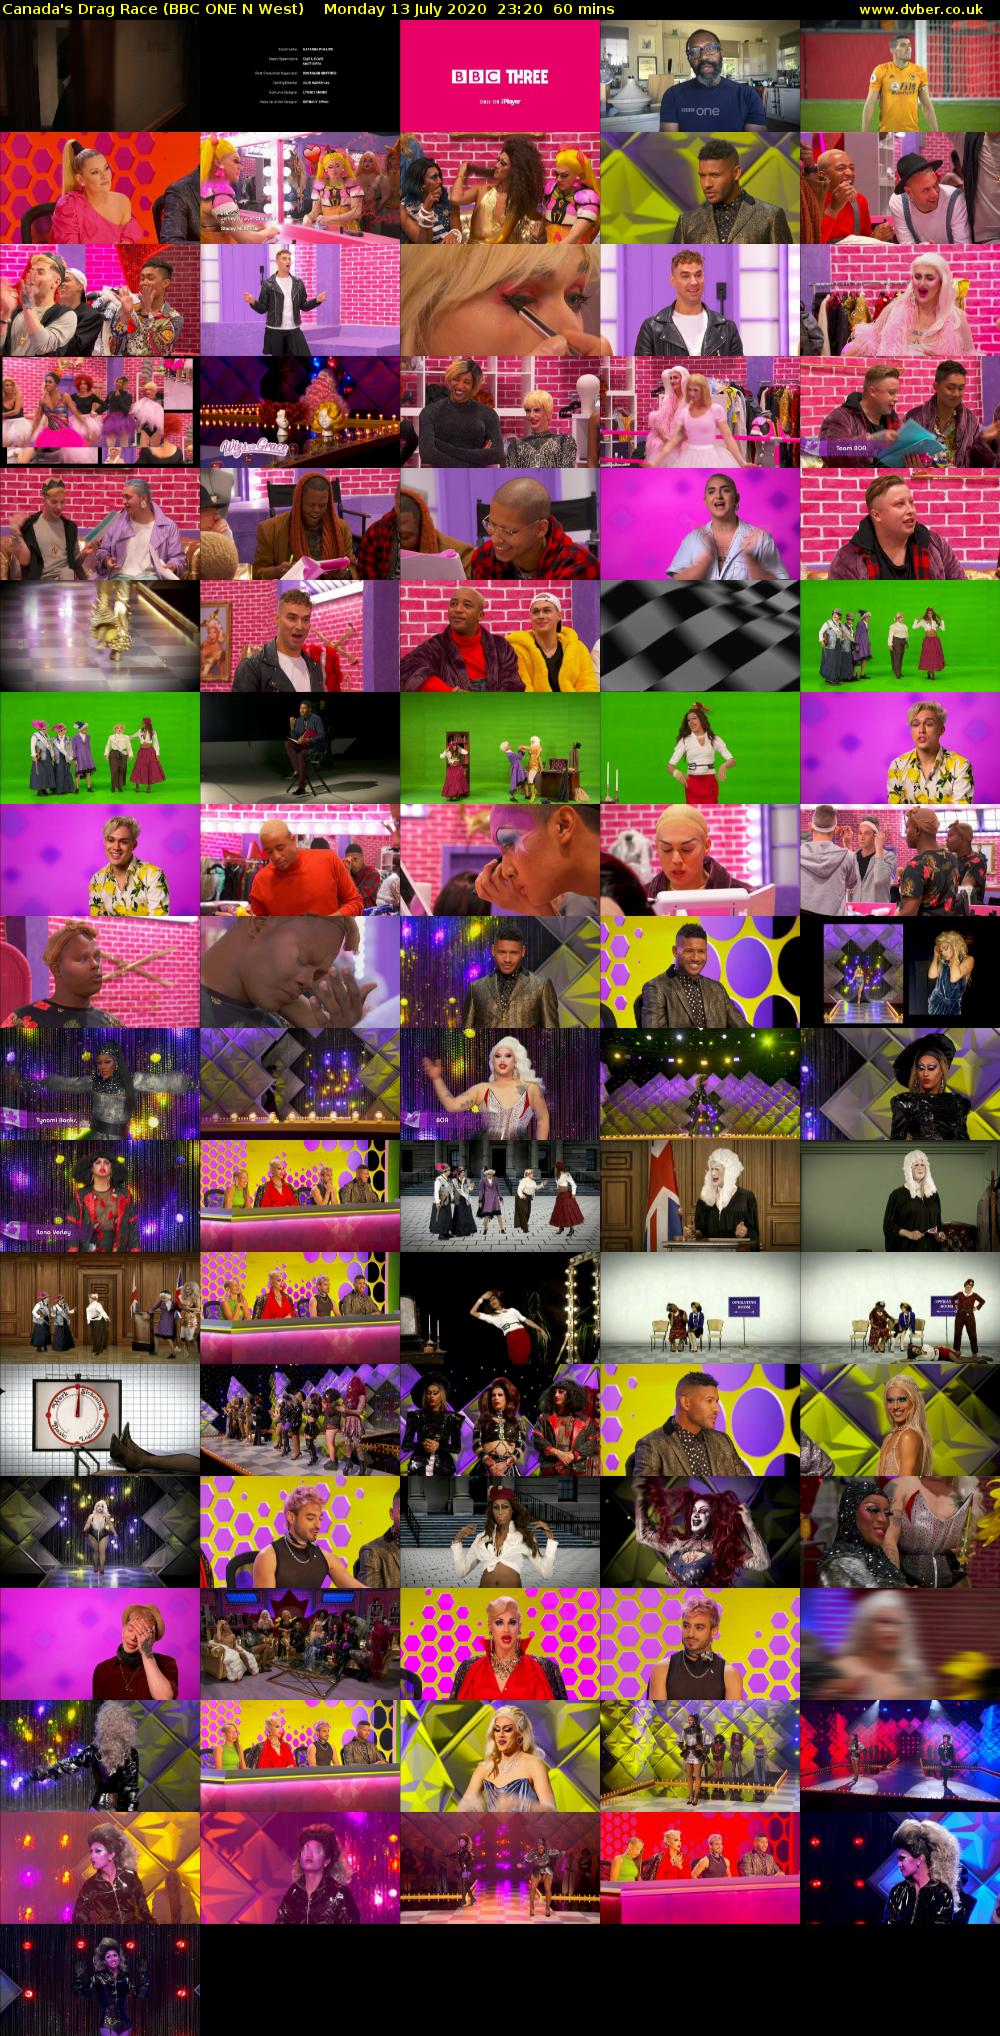 Canada's Drag Race (BBC ONE N West) Monday 13 July 2020 23:20 - 00:20